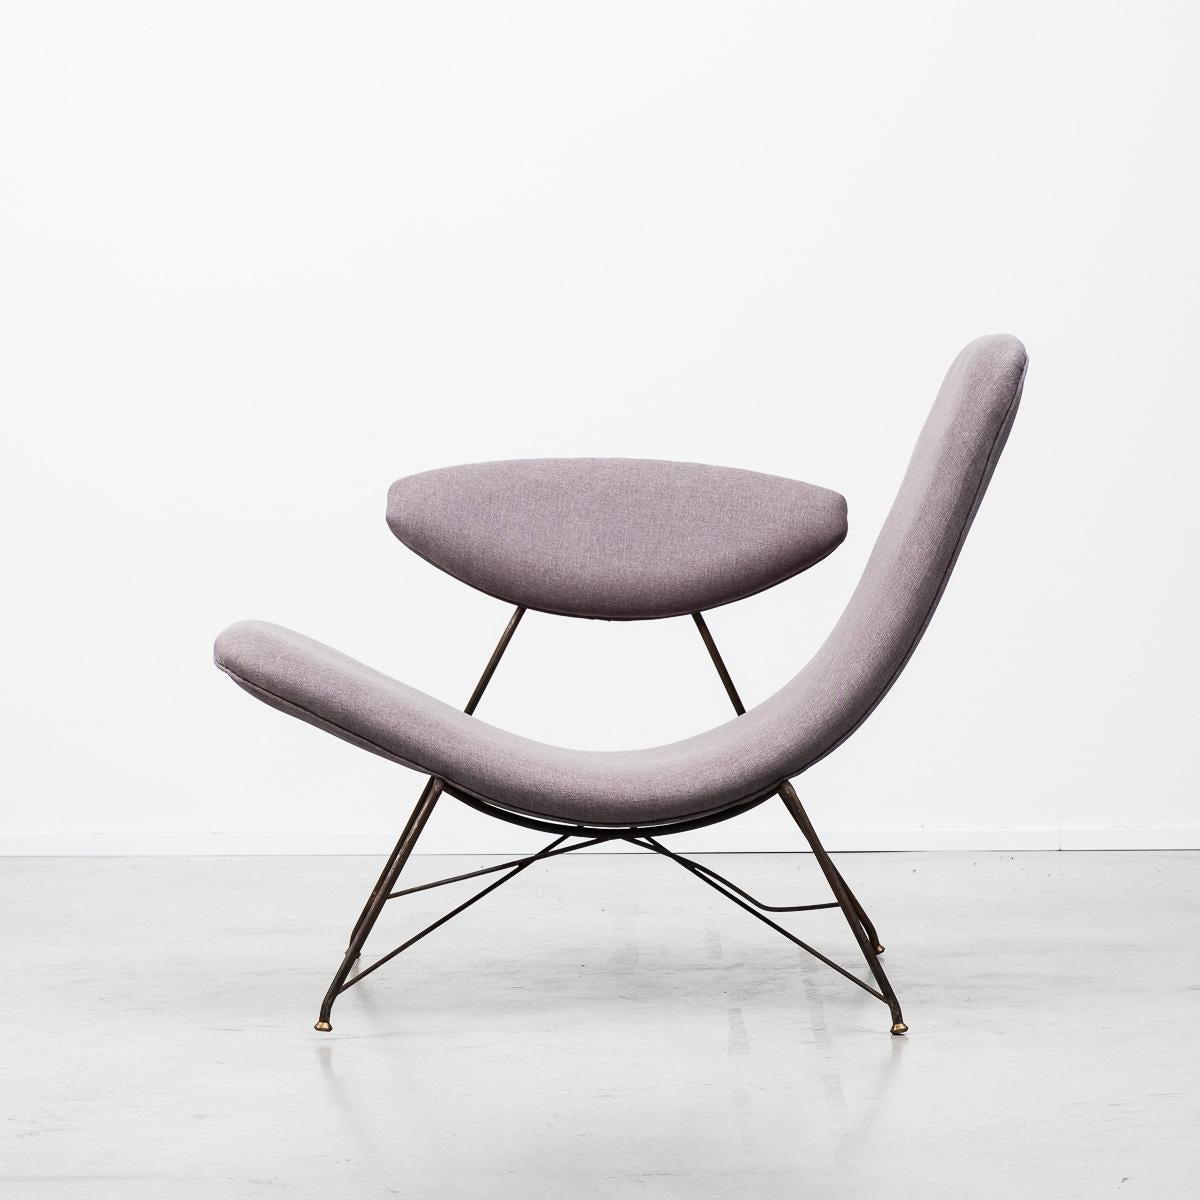 The Reversible chair was designed by Carlo Hauner and Martin Eisler, an Italian-Austrian duo based in Brazil. They co-founded the company Forma Moveis and worked both together and individually on a large number of designs.

This particular design